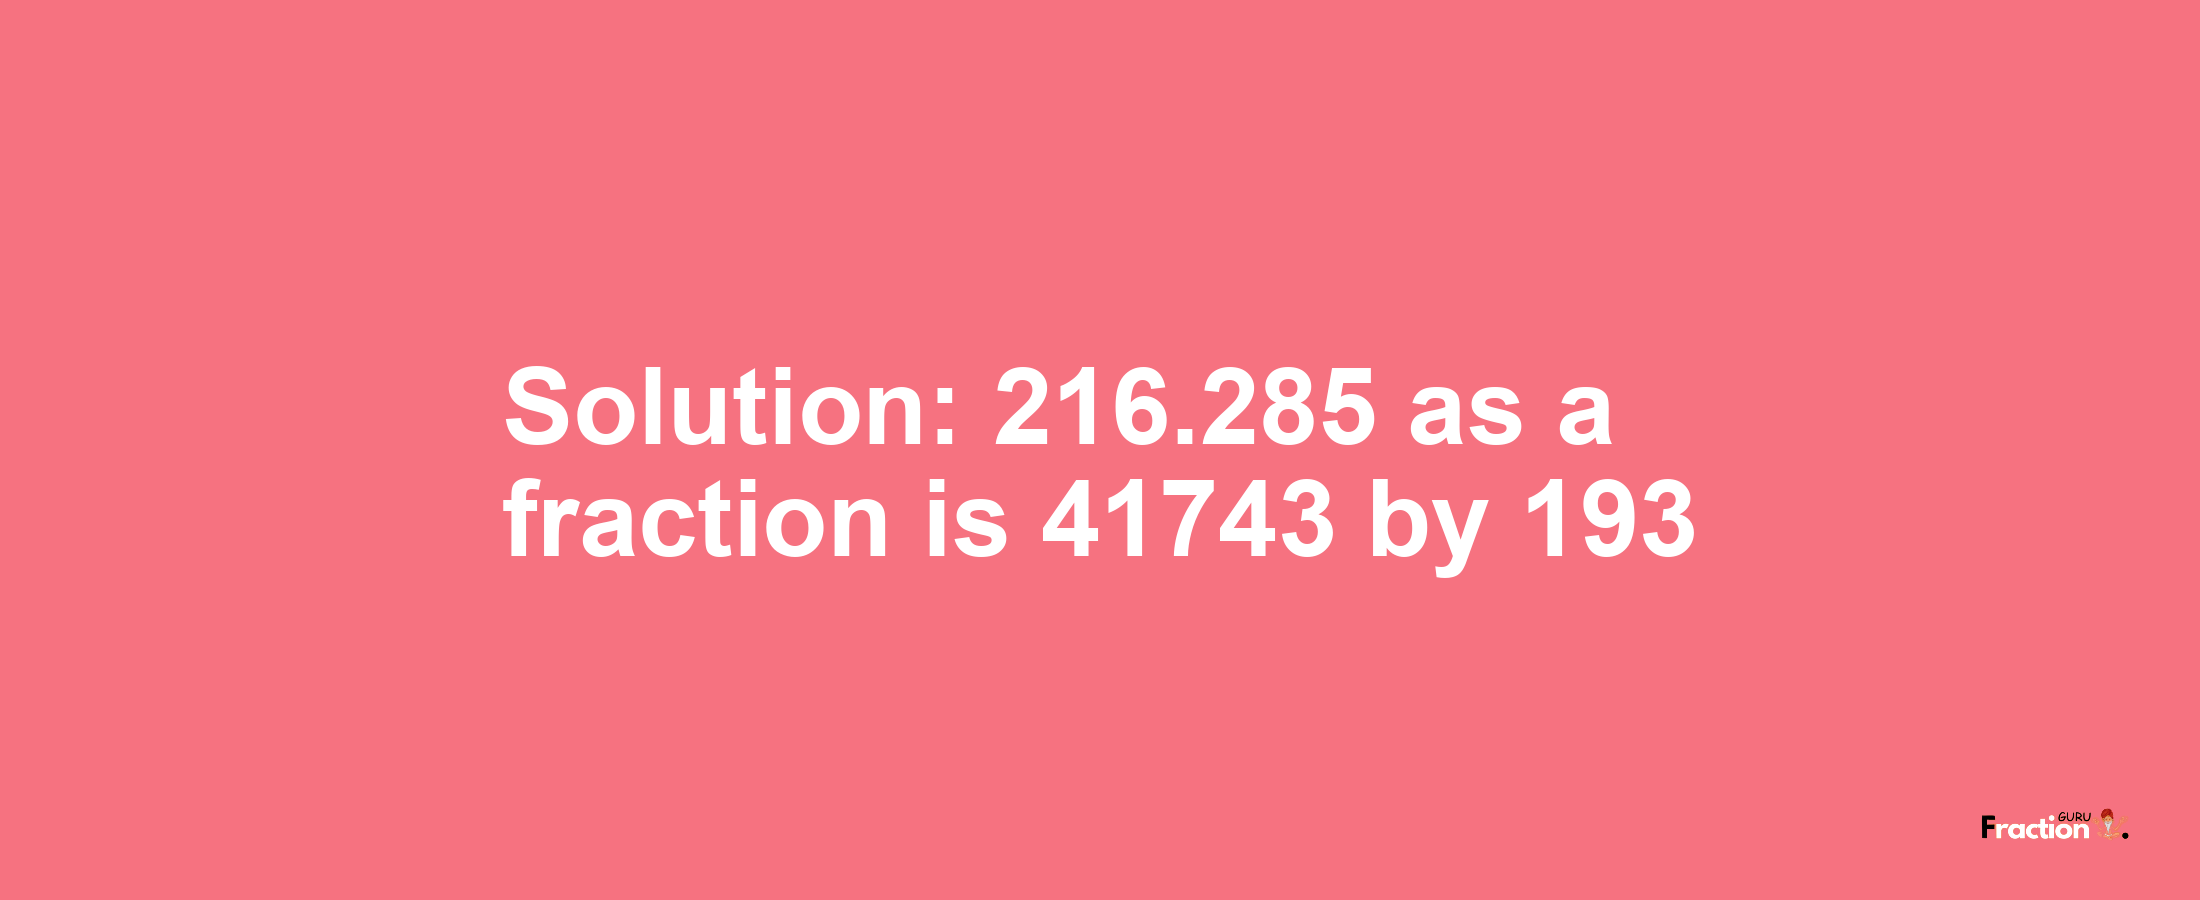 Solution:216.285 as a fraction is 41743/193